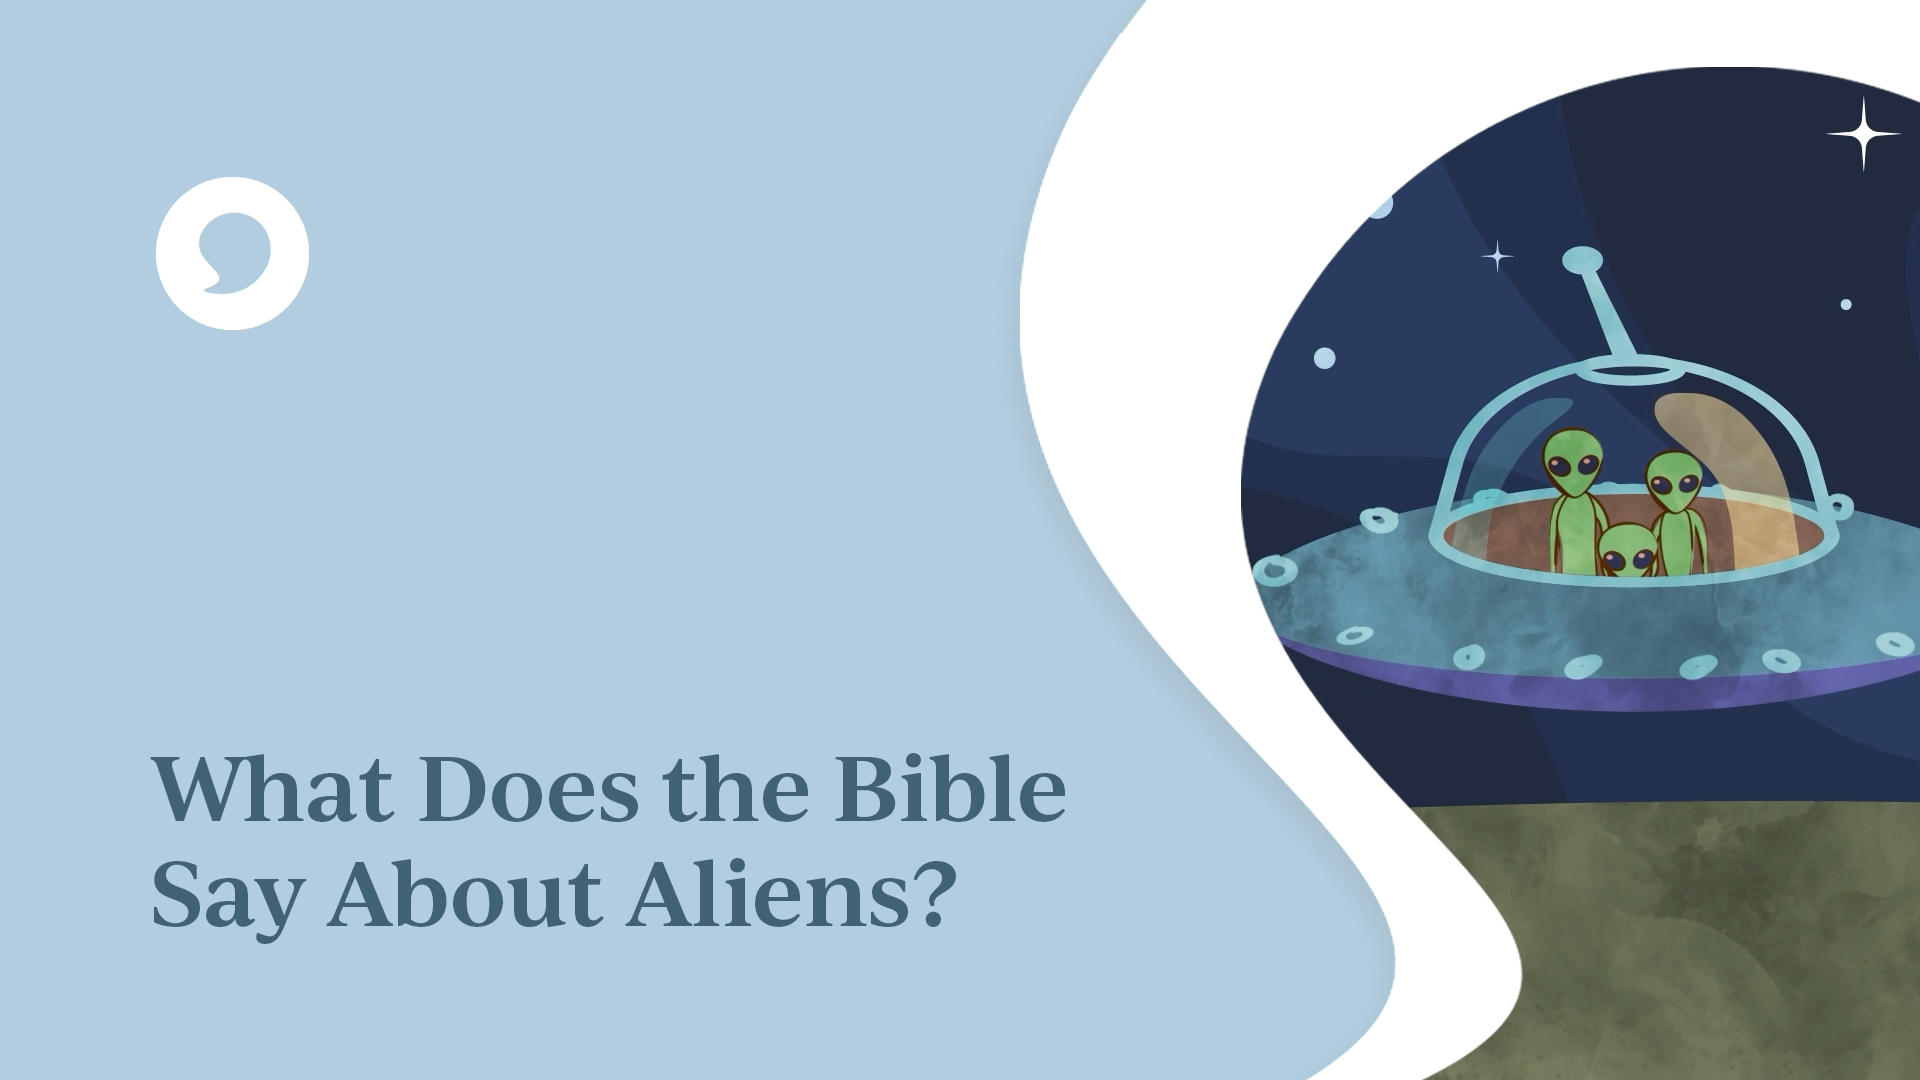 What Does the Bible Say About Aliens?